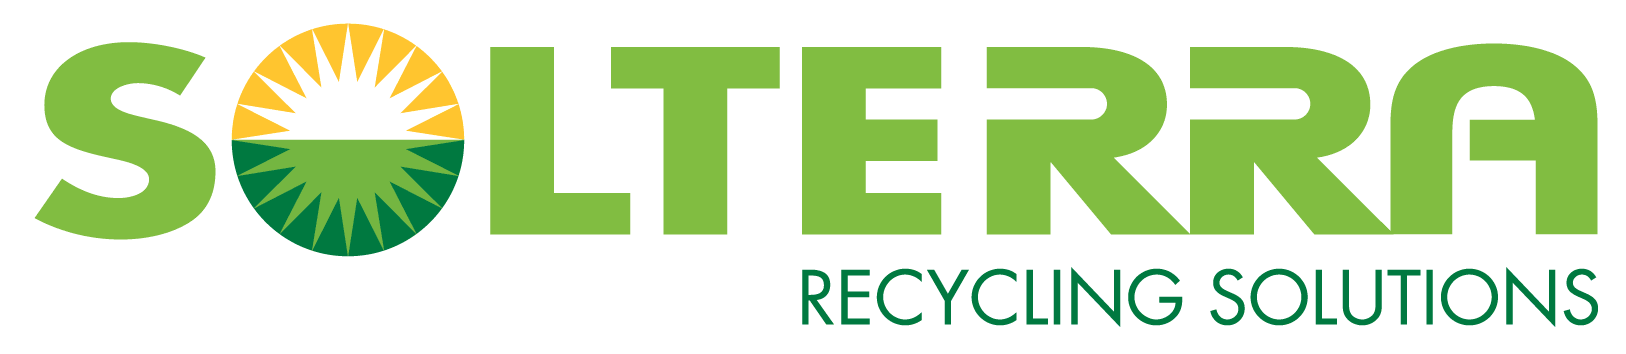 Solterra Recycling Solutions